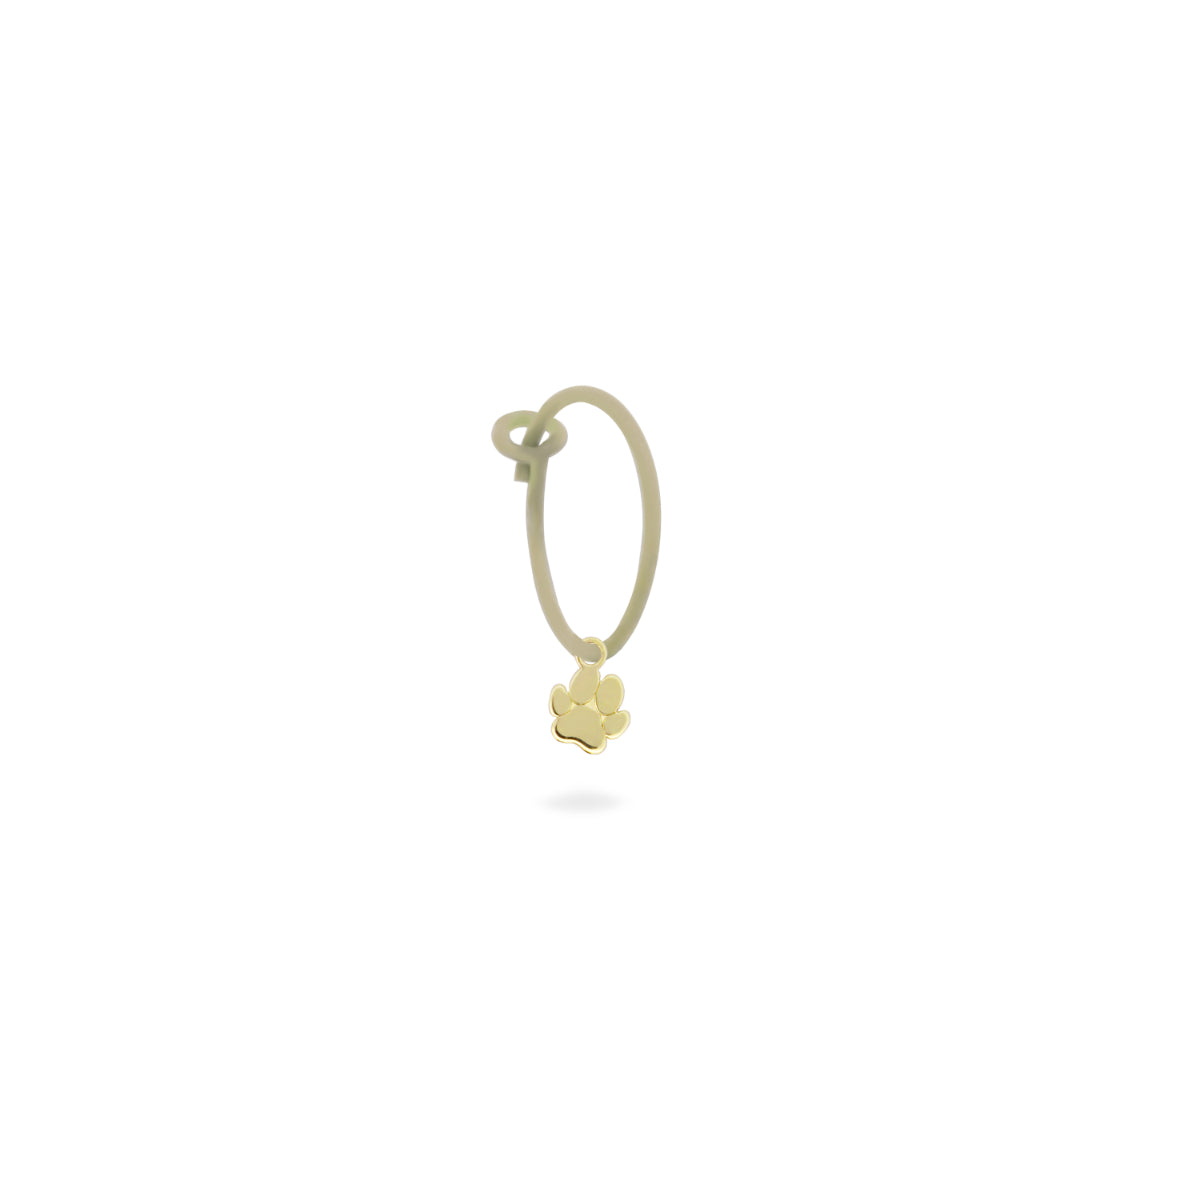 Earrings - Single earring with paw and painted hoop - ORO18KT - 1 | Rue des Mille